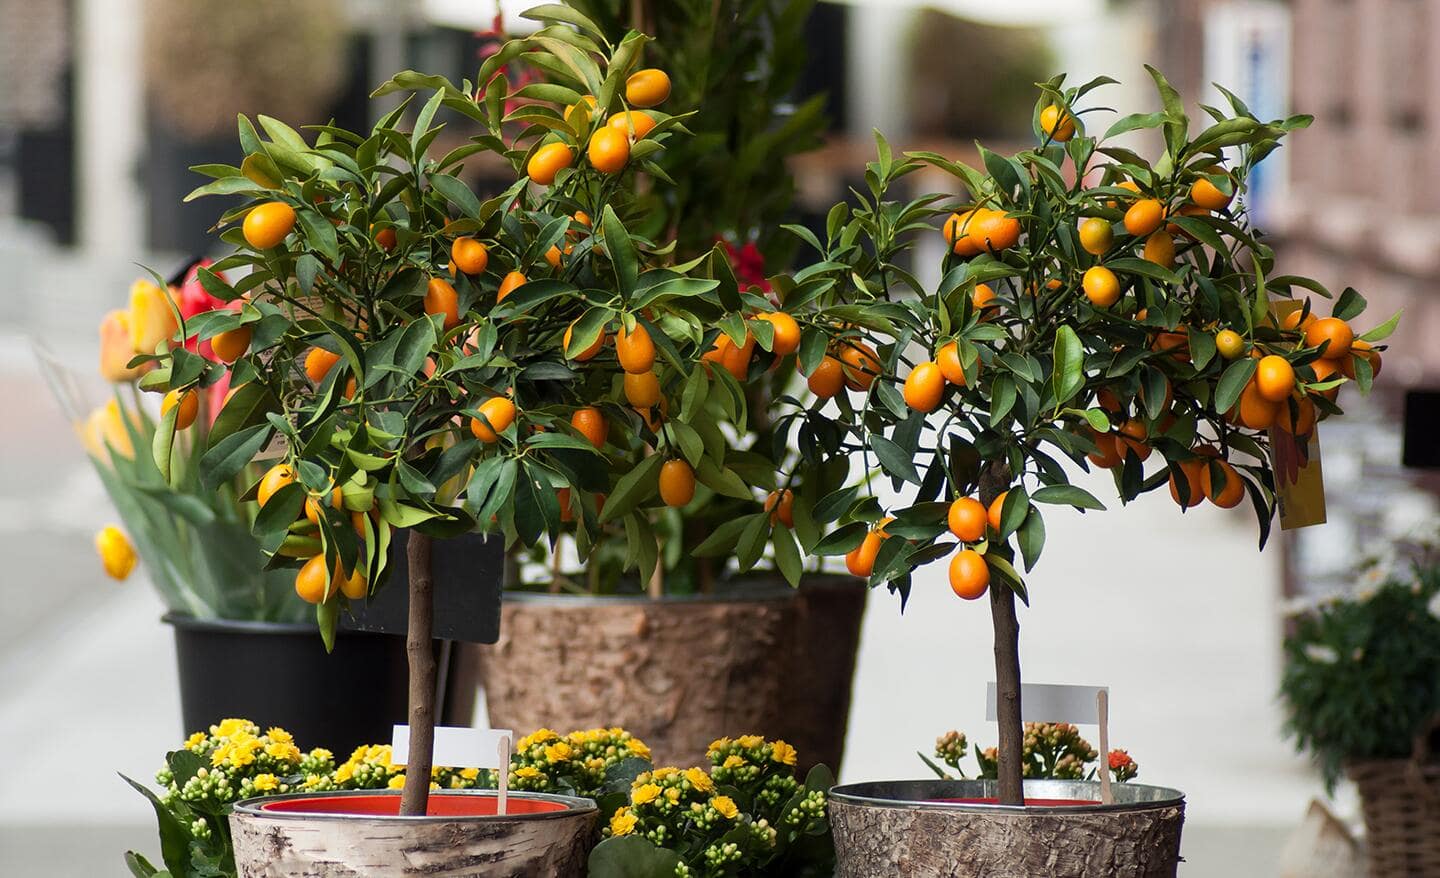 A collection of kumquat trees in containers